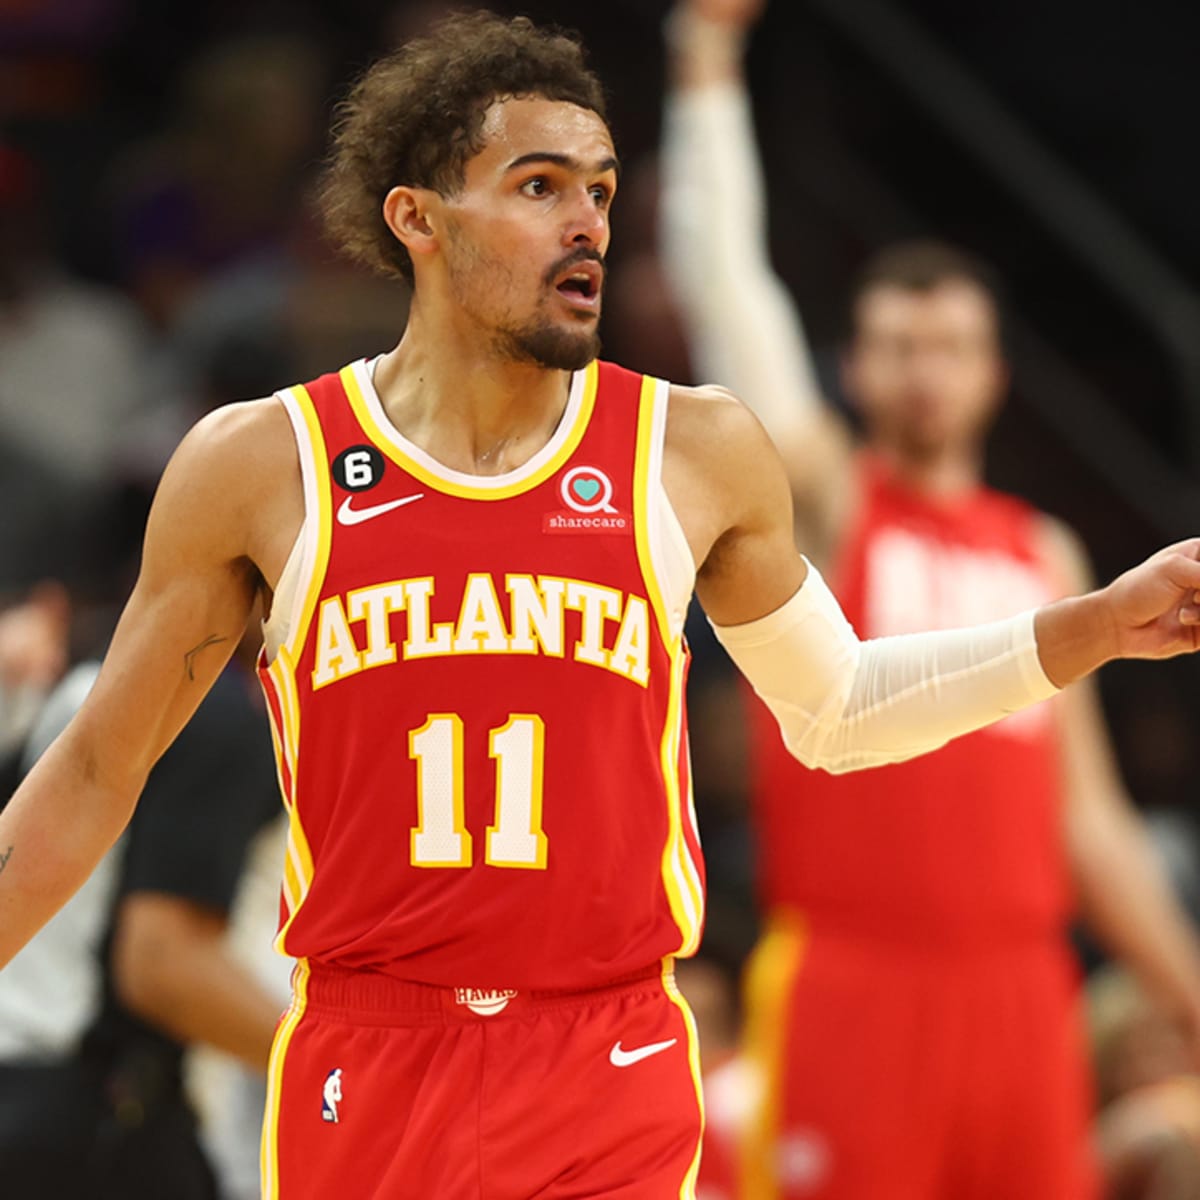 Trae Young trashed on Twitter after sharing a hot take about his